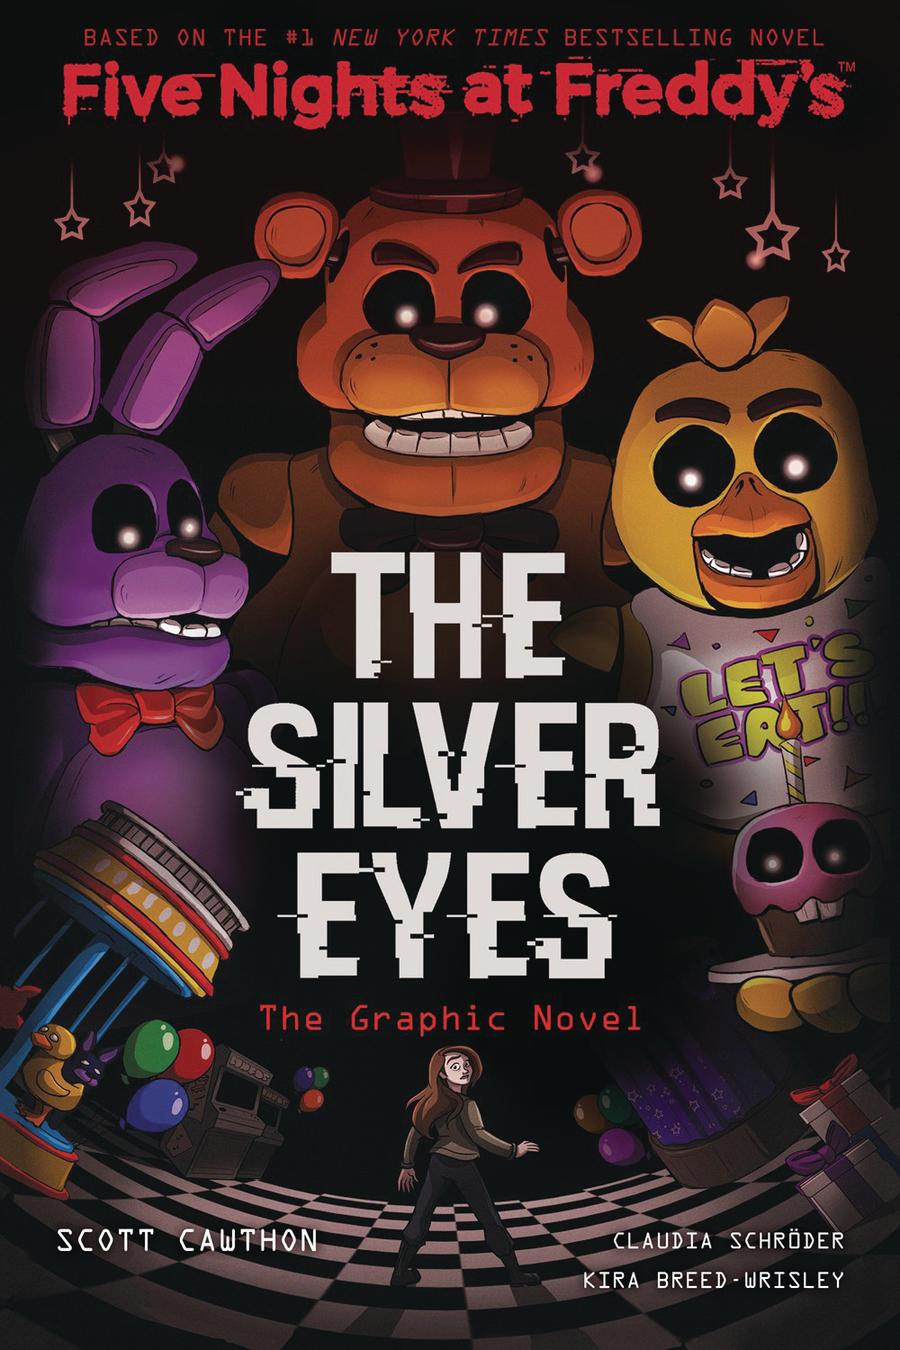 Five Nights At Freddys The Graphic Novel Vol 1 Silver Eyes HC